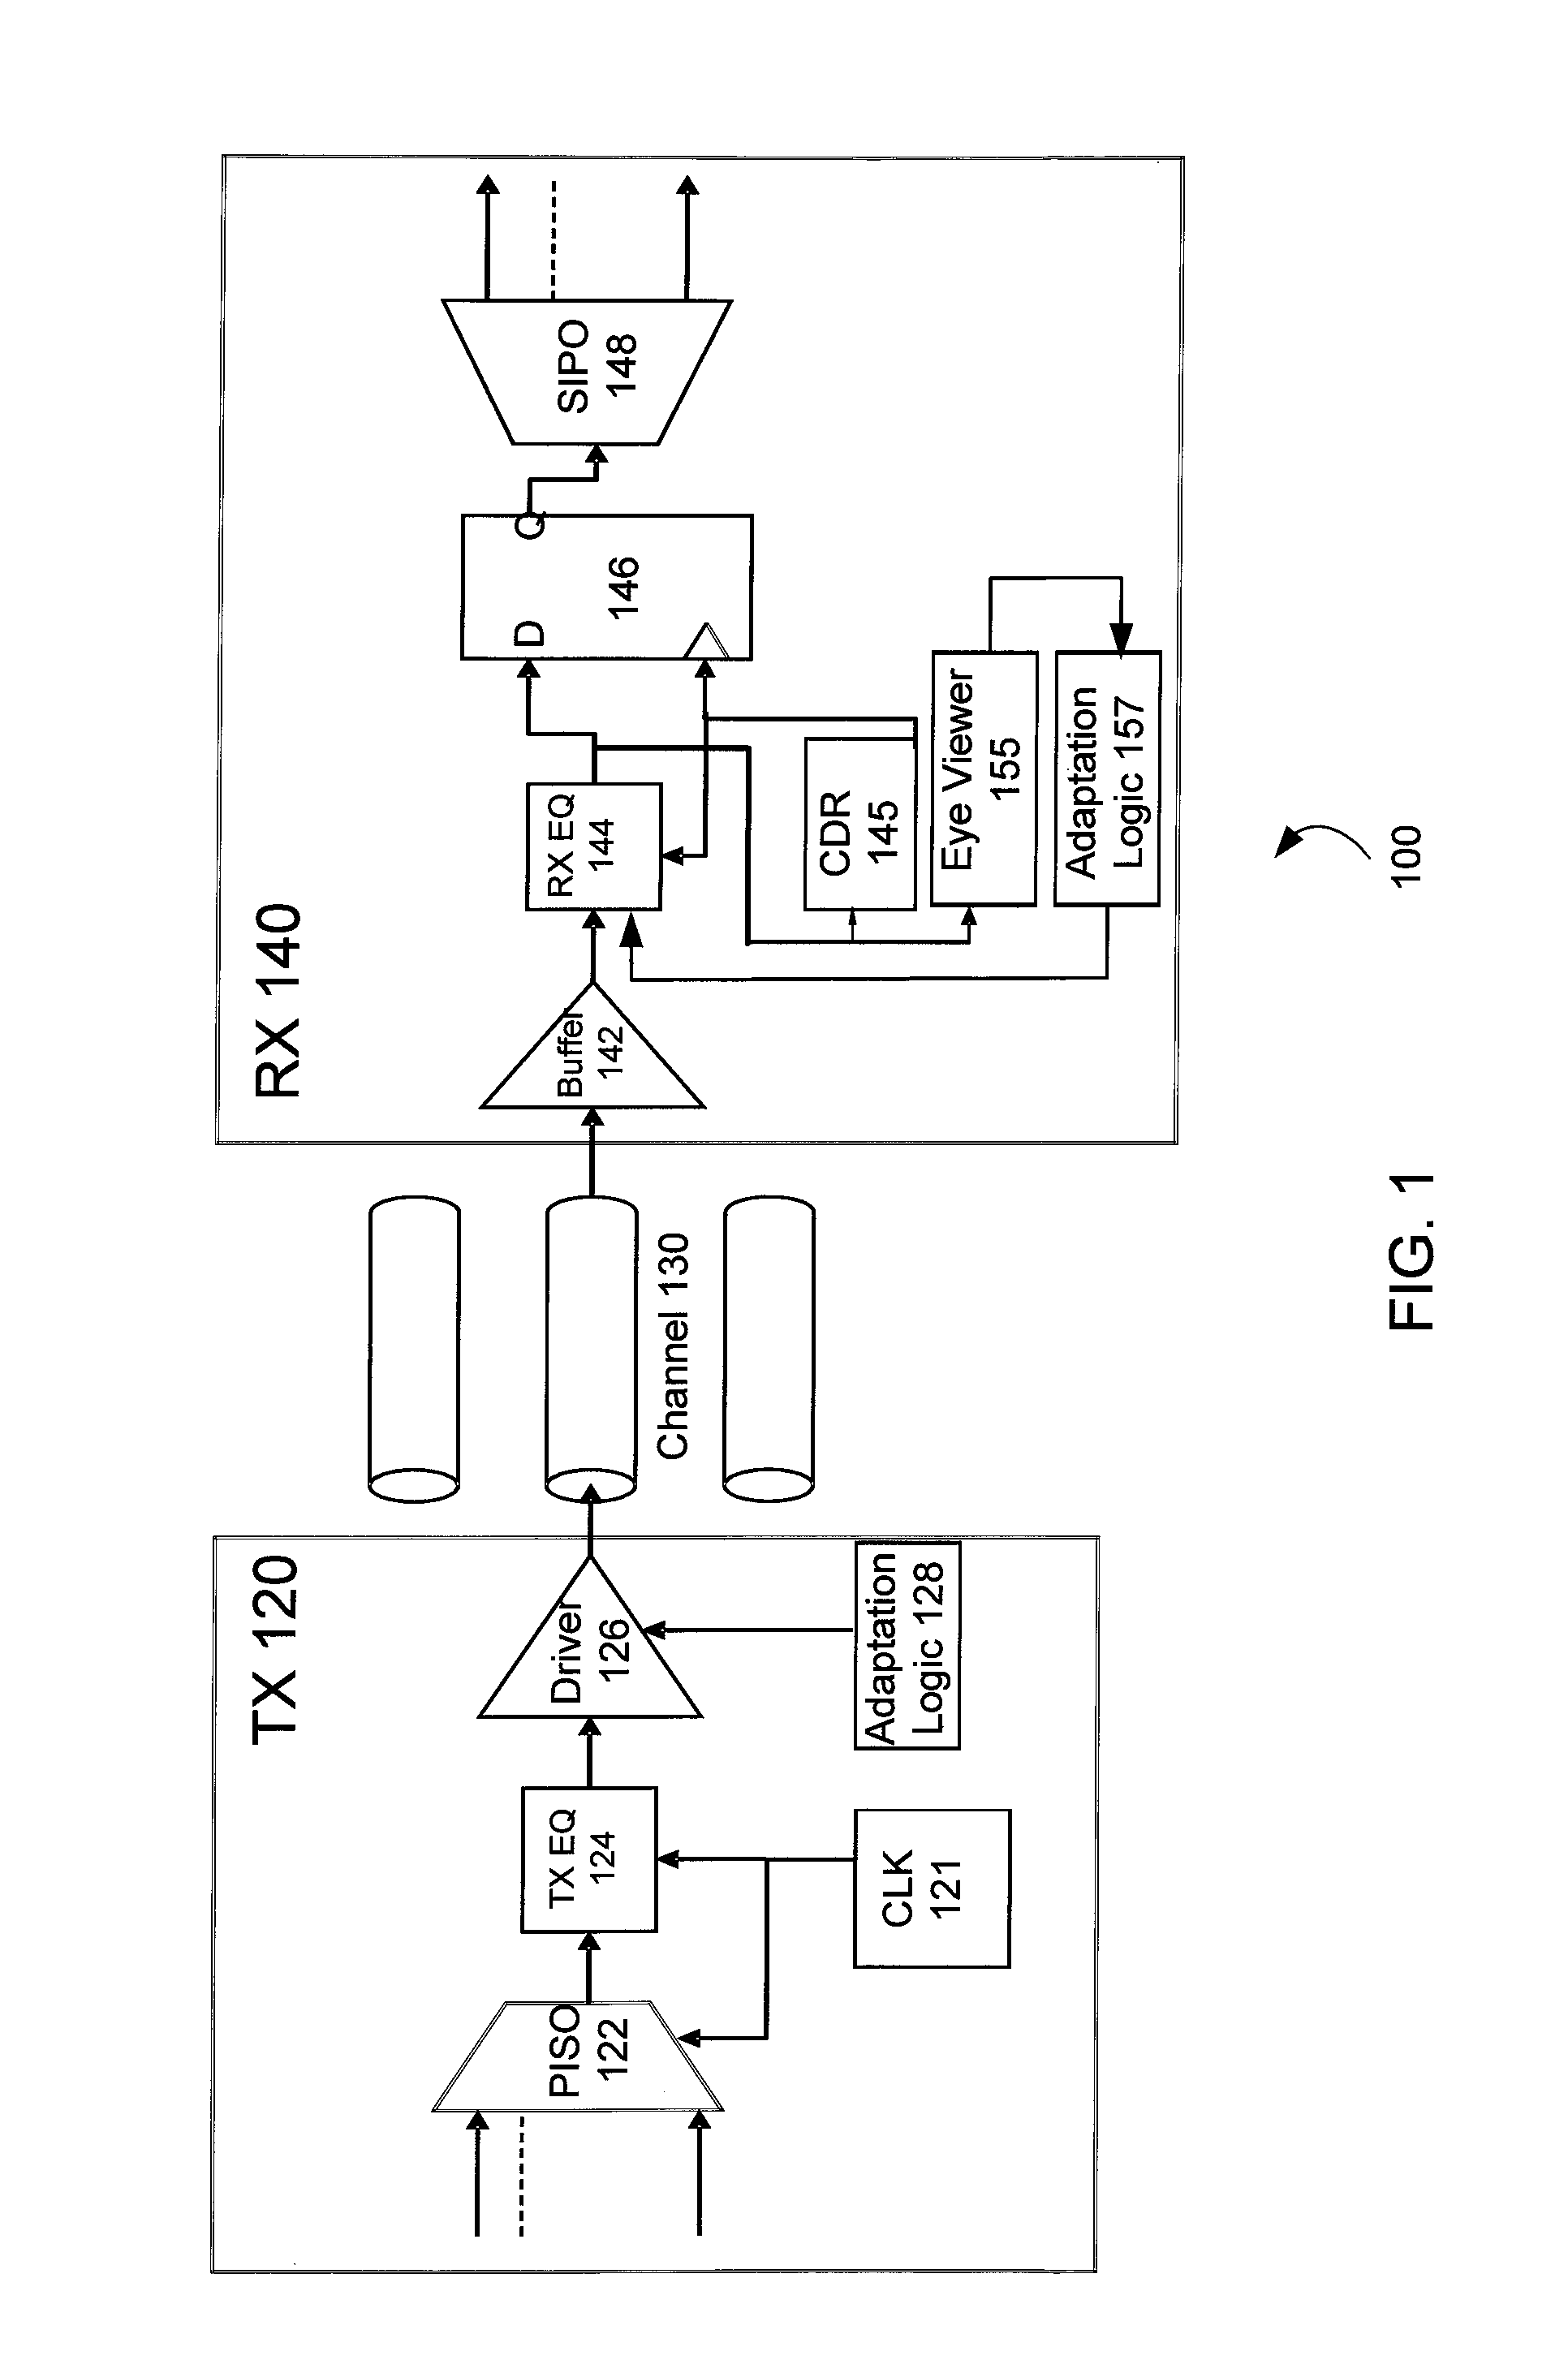 Apparatus and methods for transceiver power adaptation